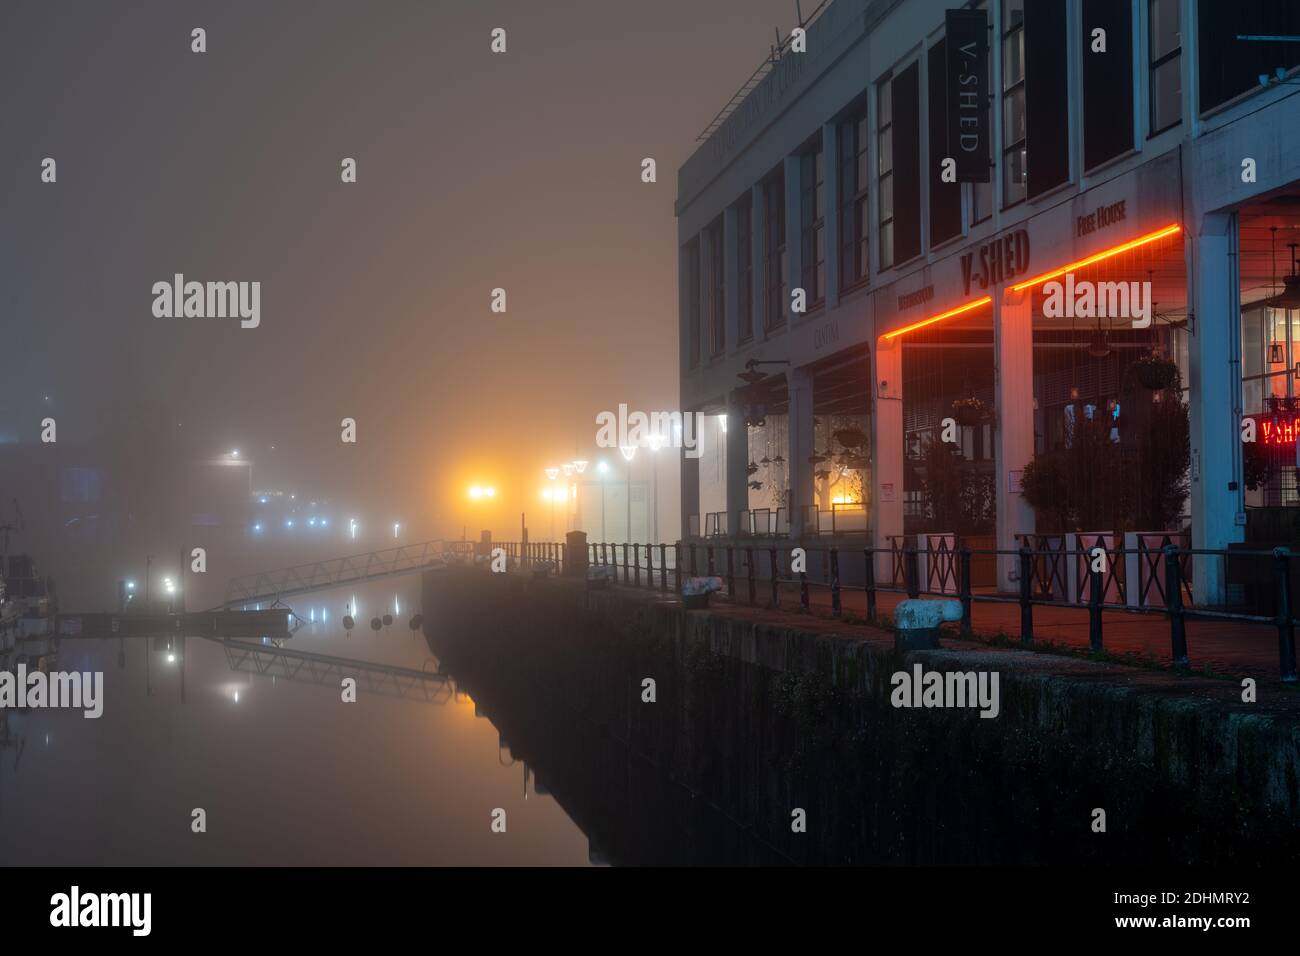 Harbourside warehouses converted into bars are shrouded in fog on an autumn night on Bristol's Floating Harbour. Stock Photo